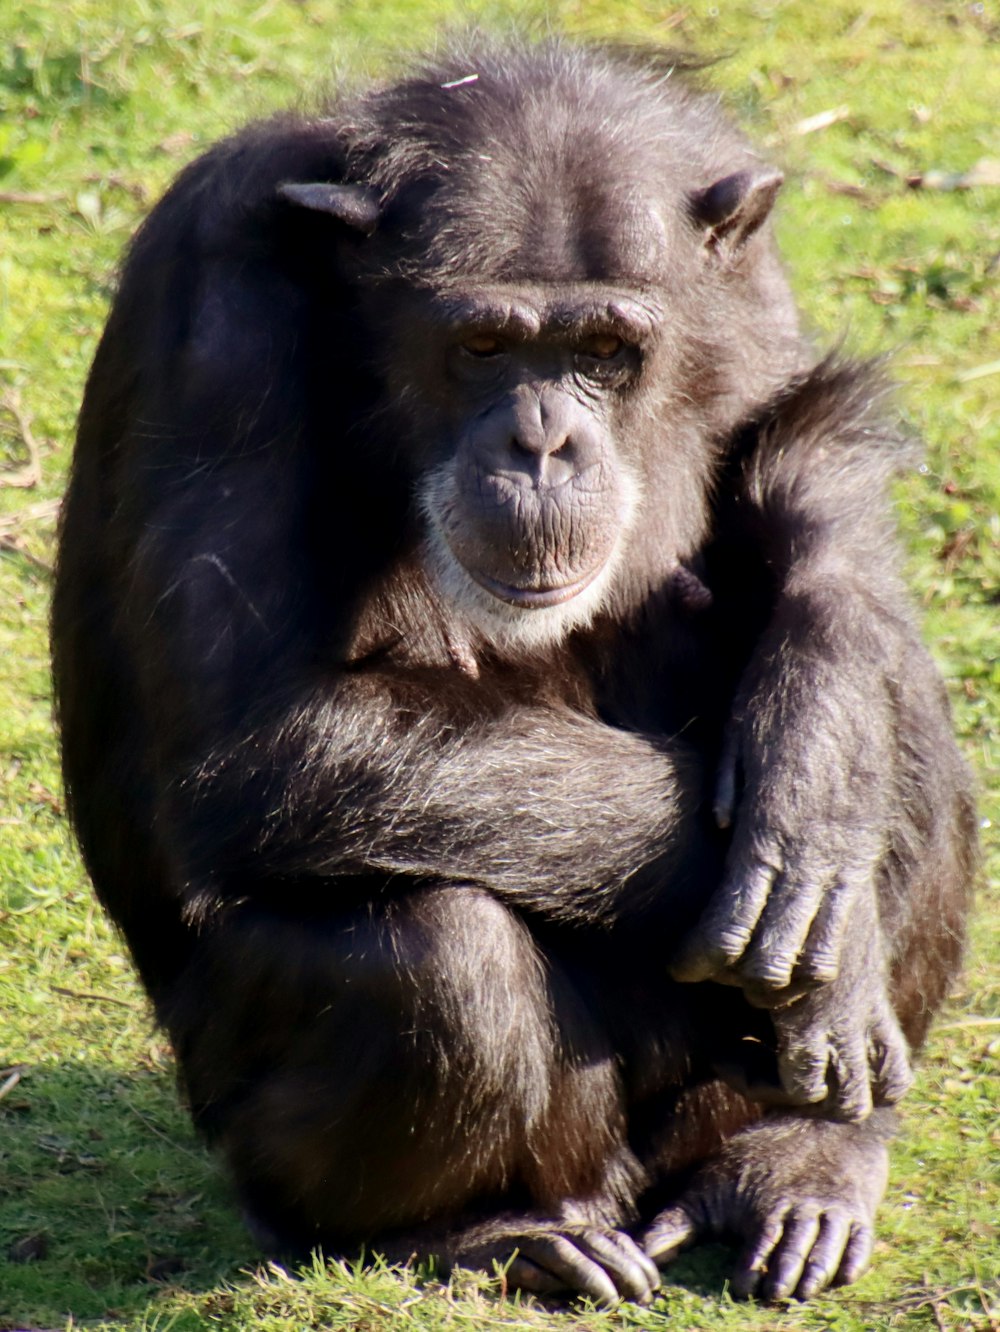 a monkey sitting on the ground in a grassy area